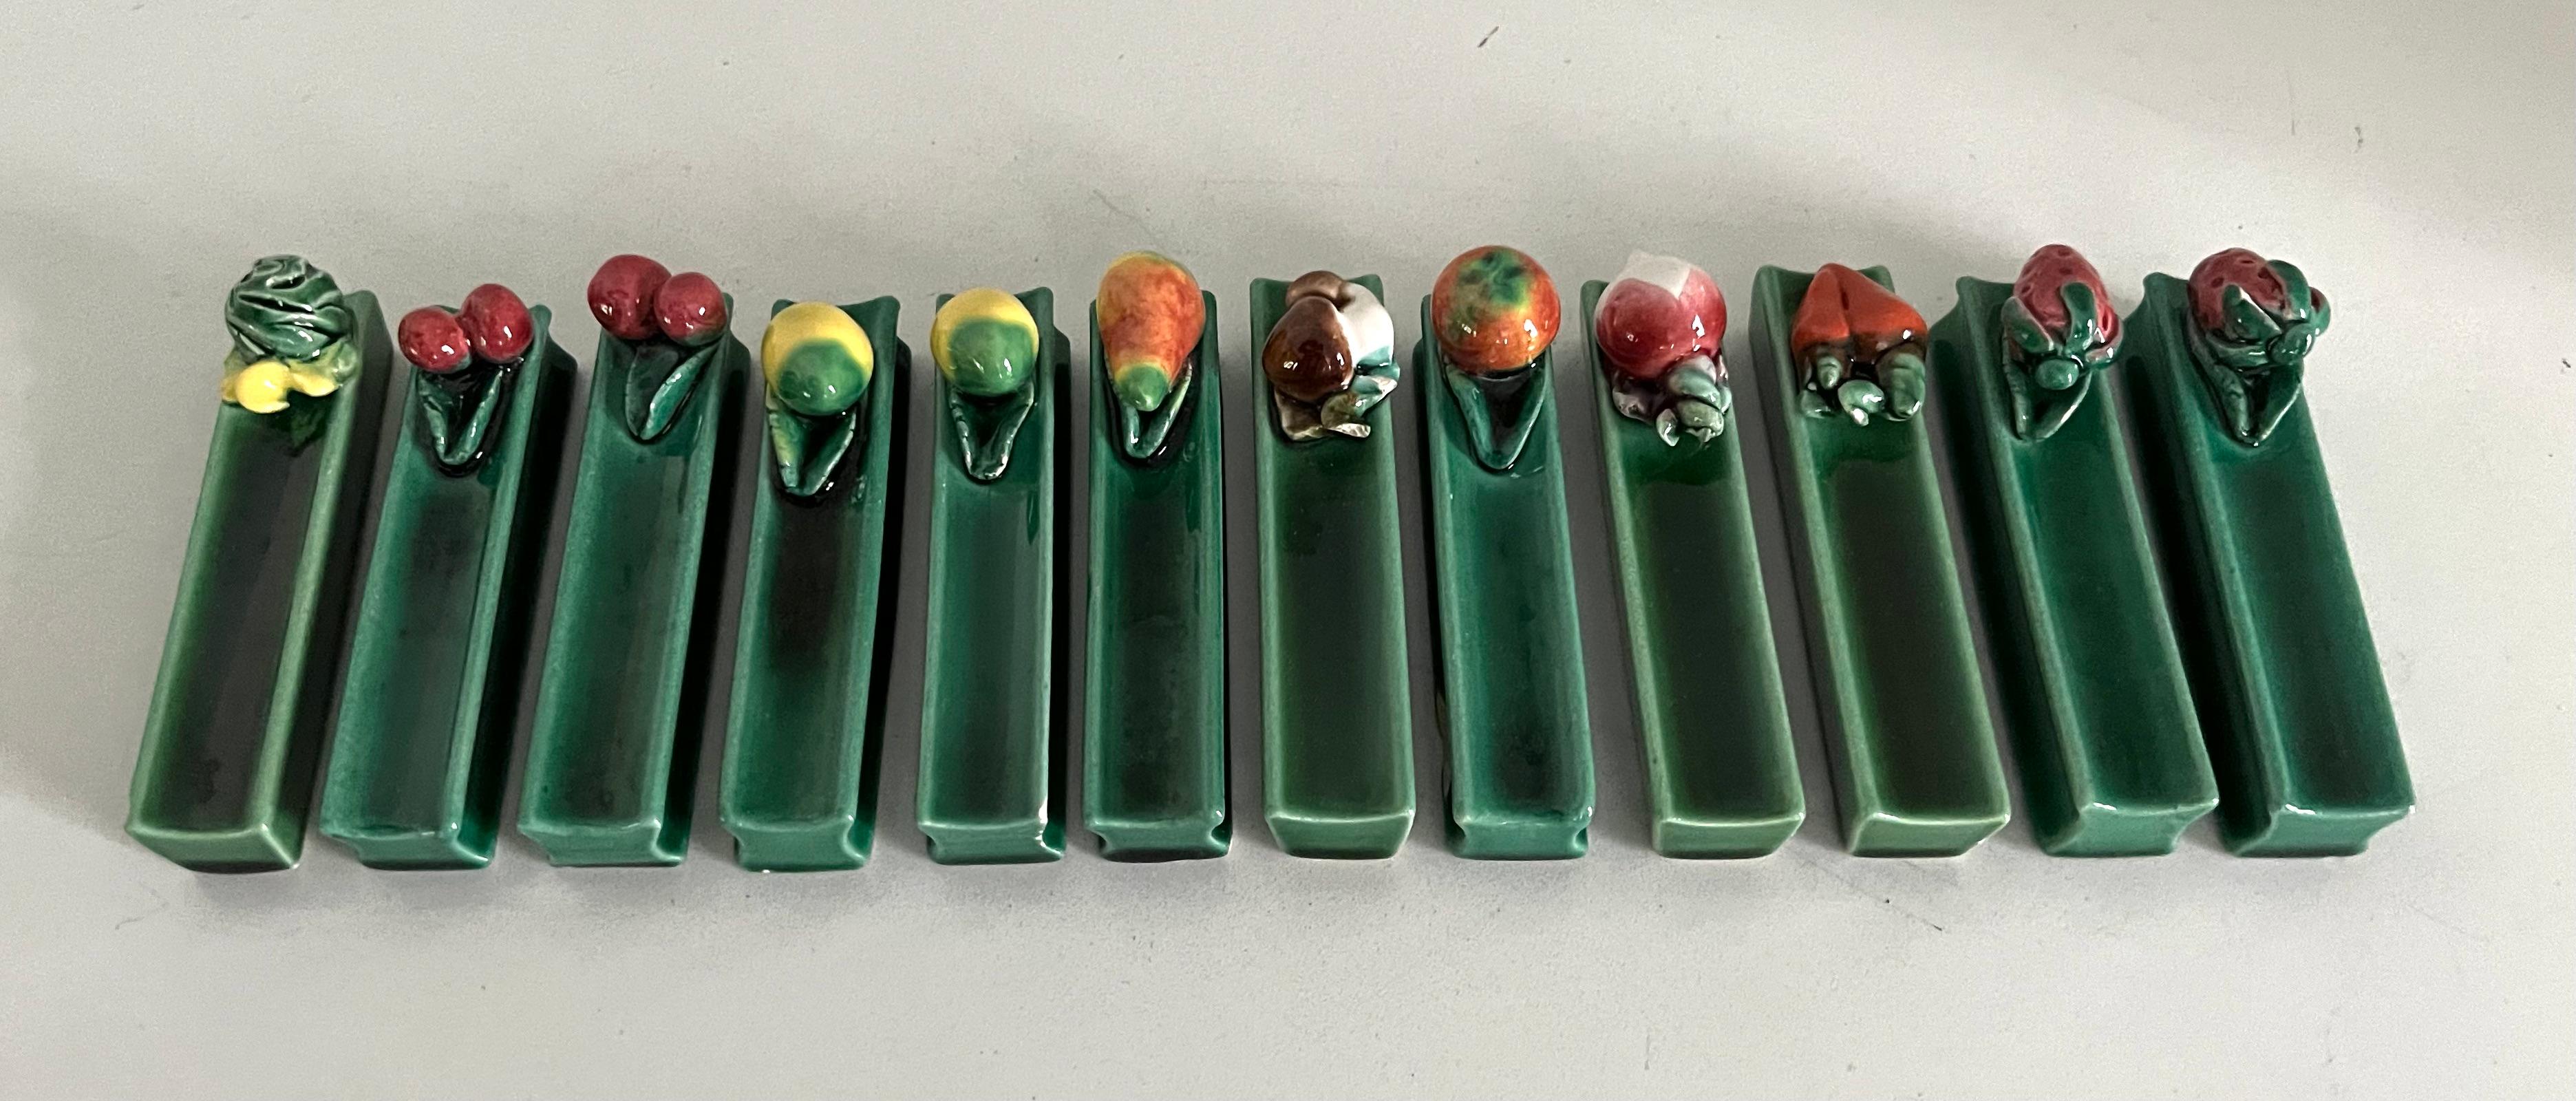 Mid-Century Modern Set of 12 French Vallauris Majolica Knife Rests with Fruit and Vegetables